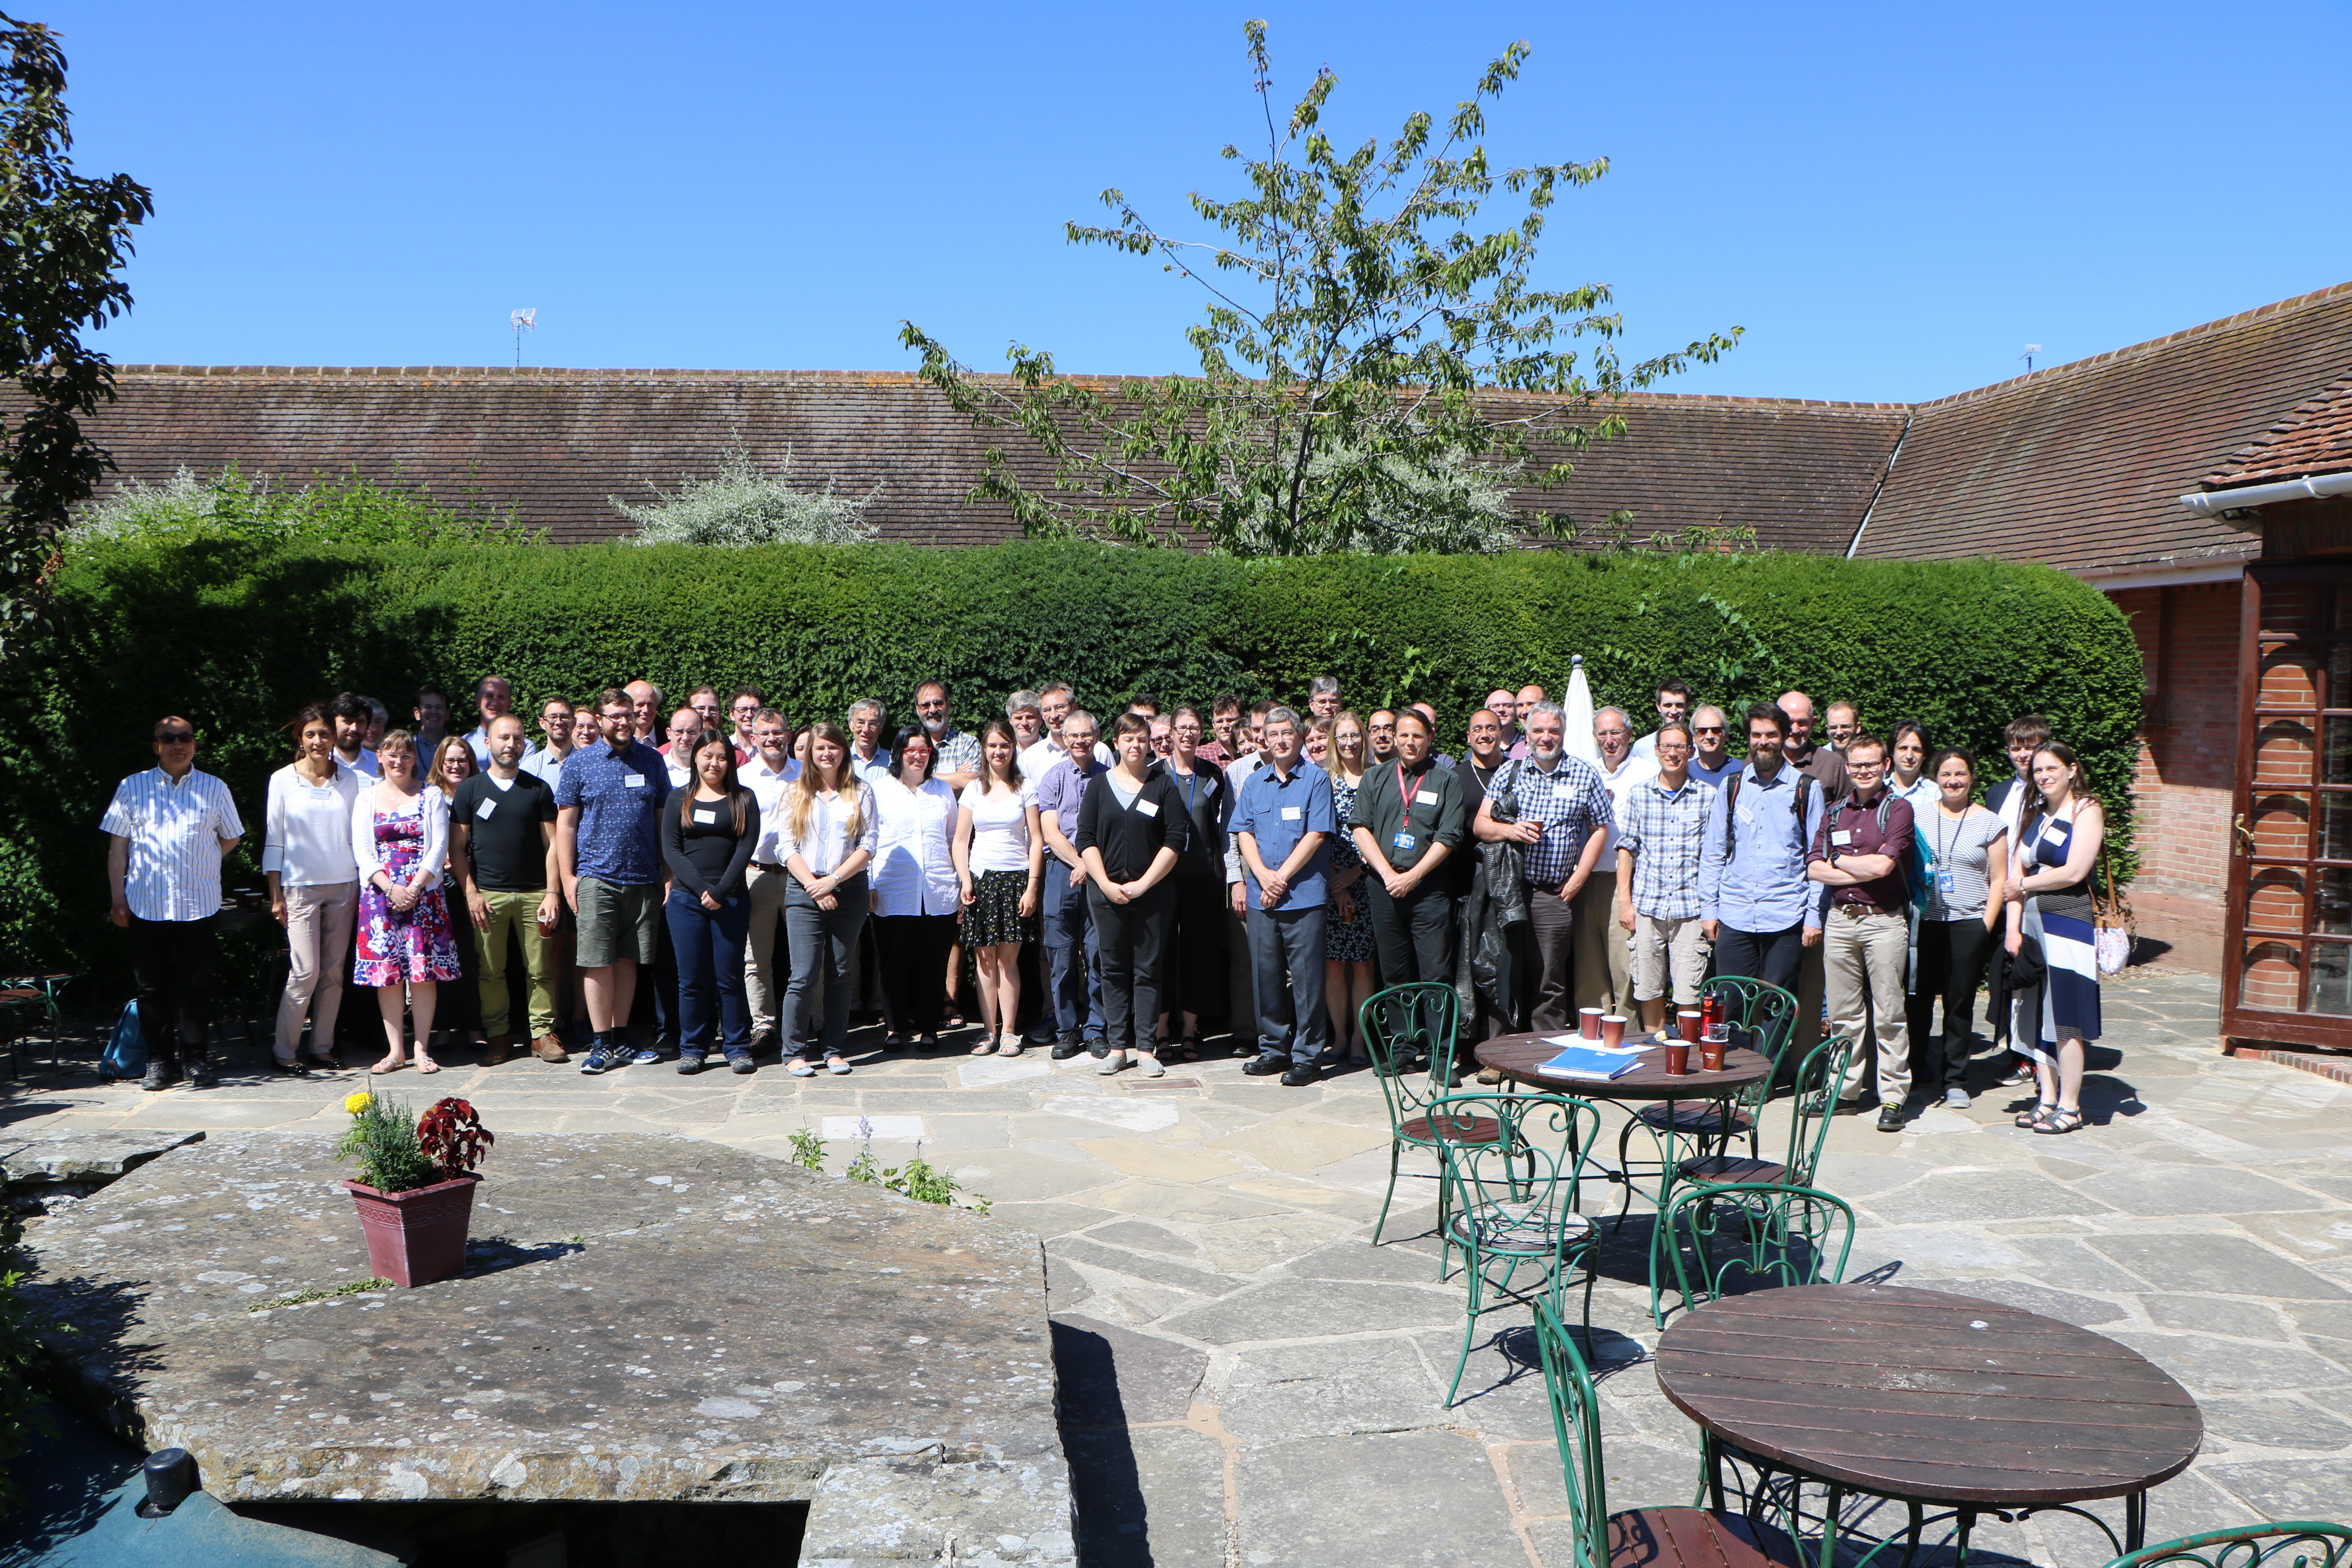 A large group of JASMIN users stand altogether in a courtyard.